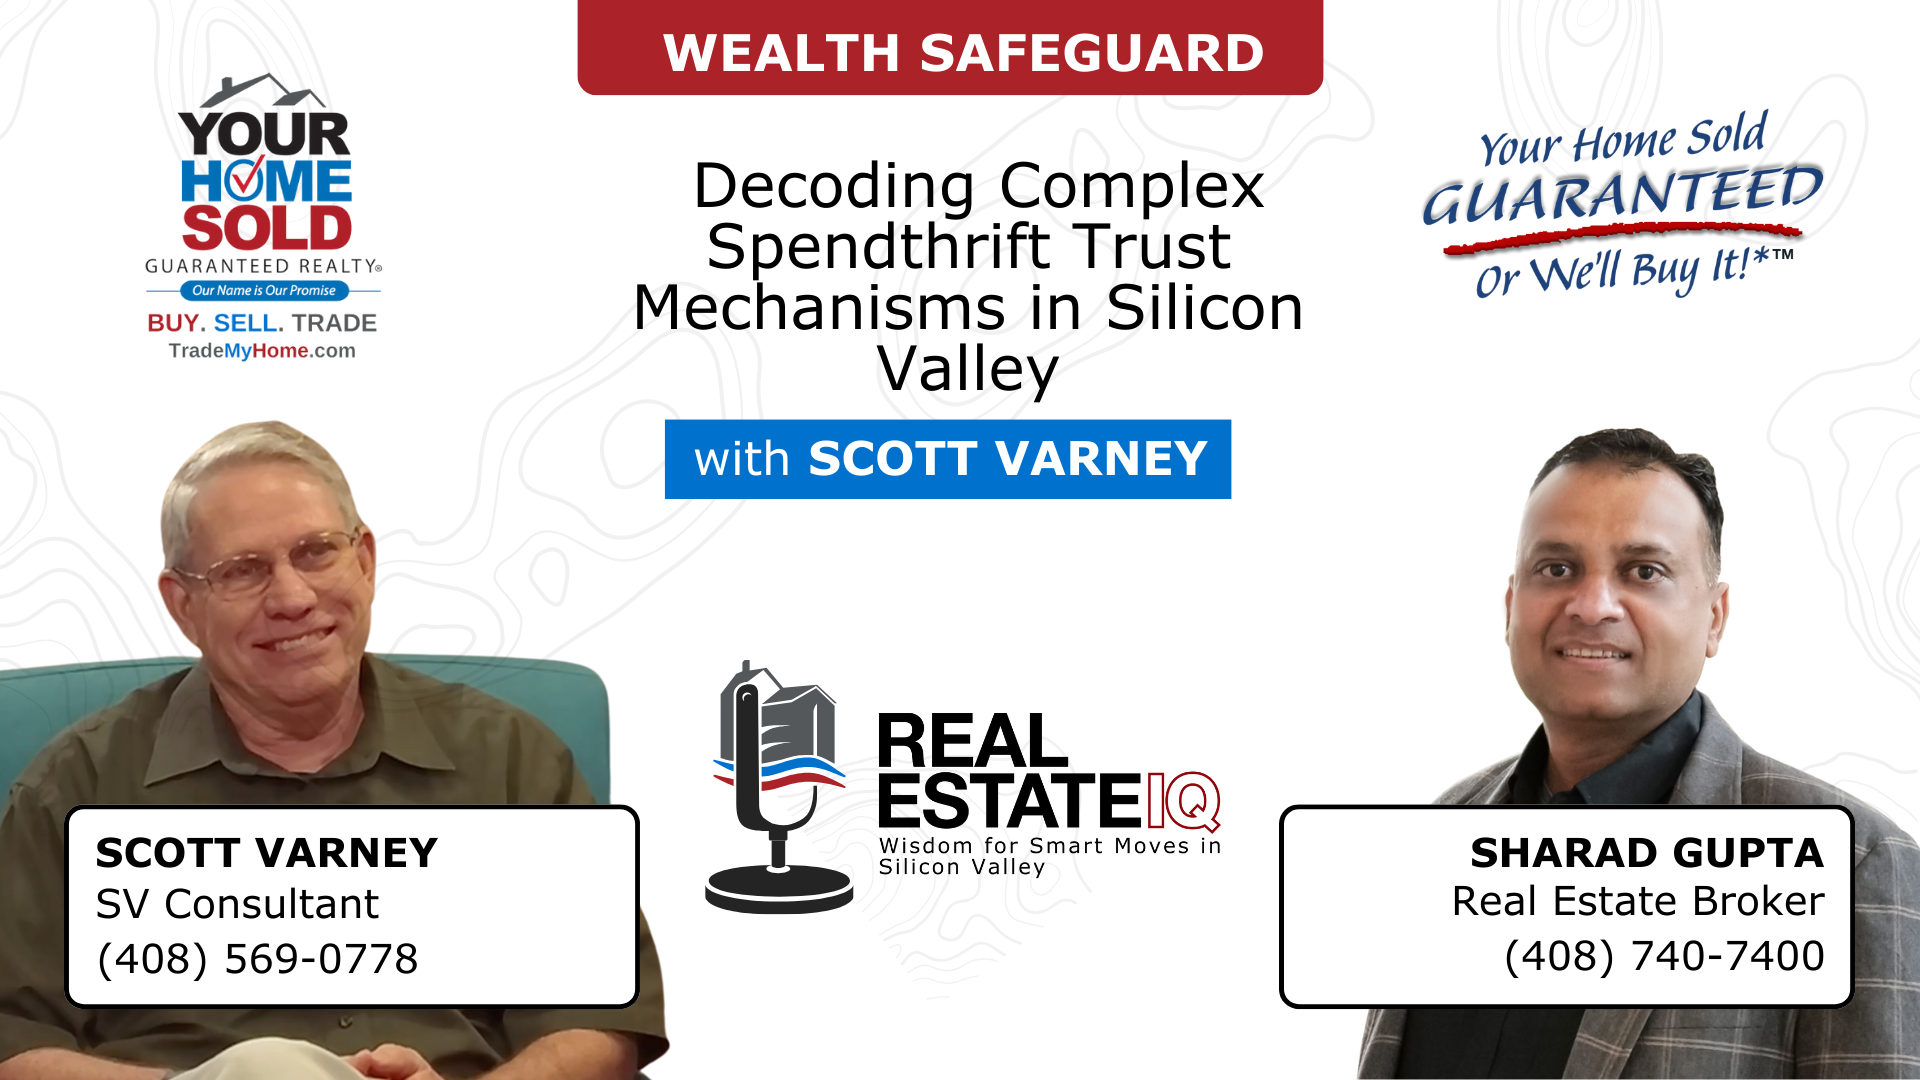 Wealth Safeguard: Decoding Complex Spendthrift Trust Mechanisms in Silicon Valley Video